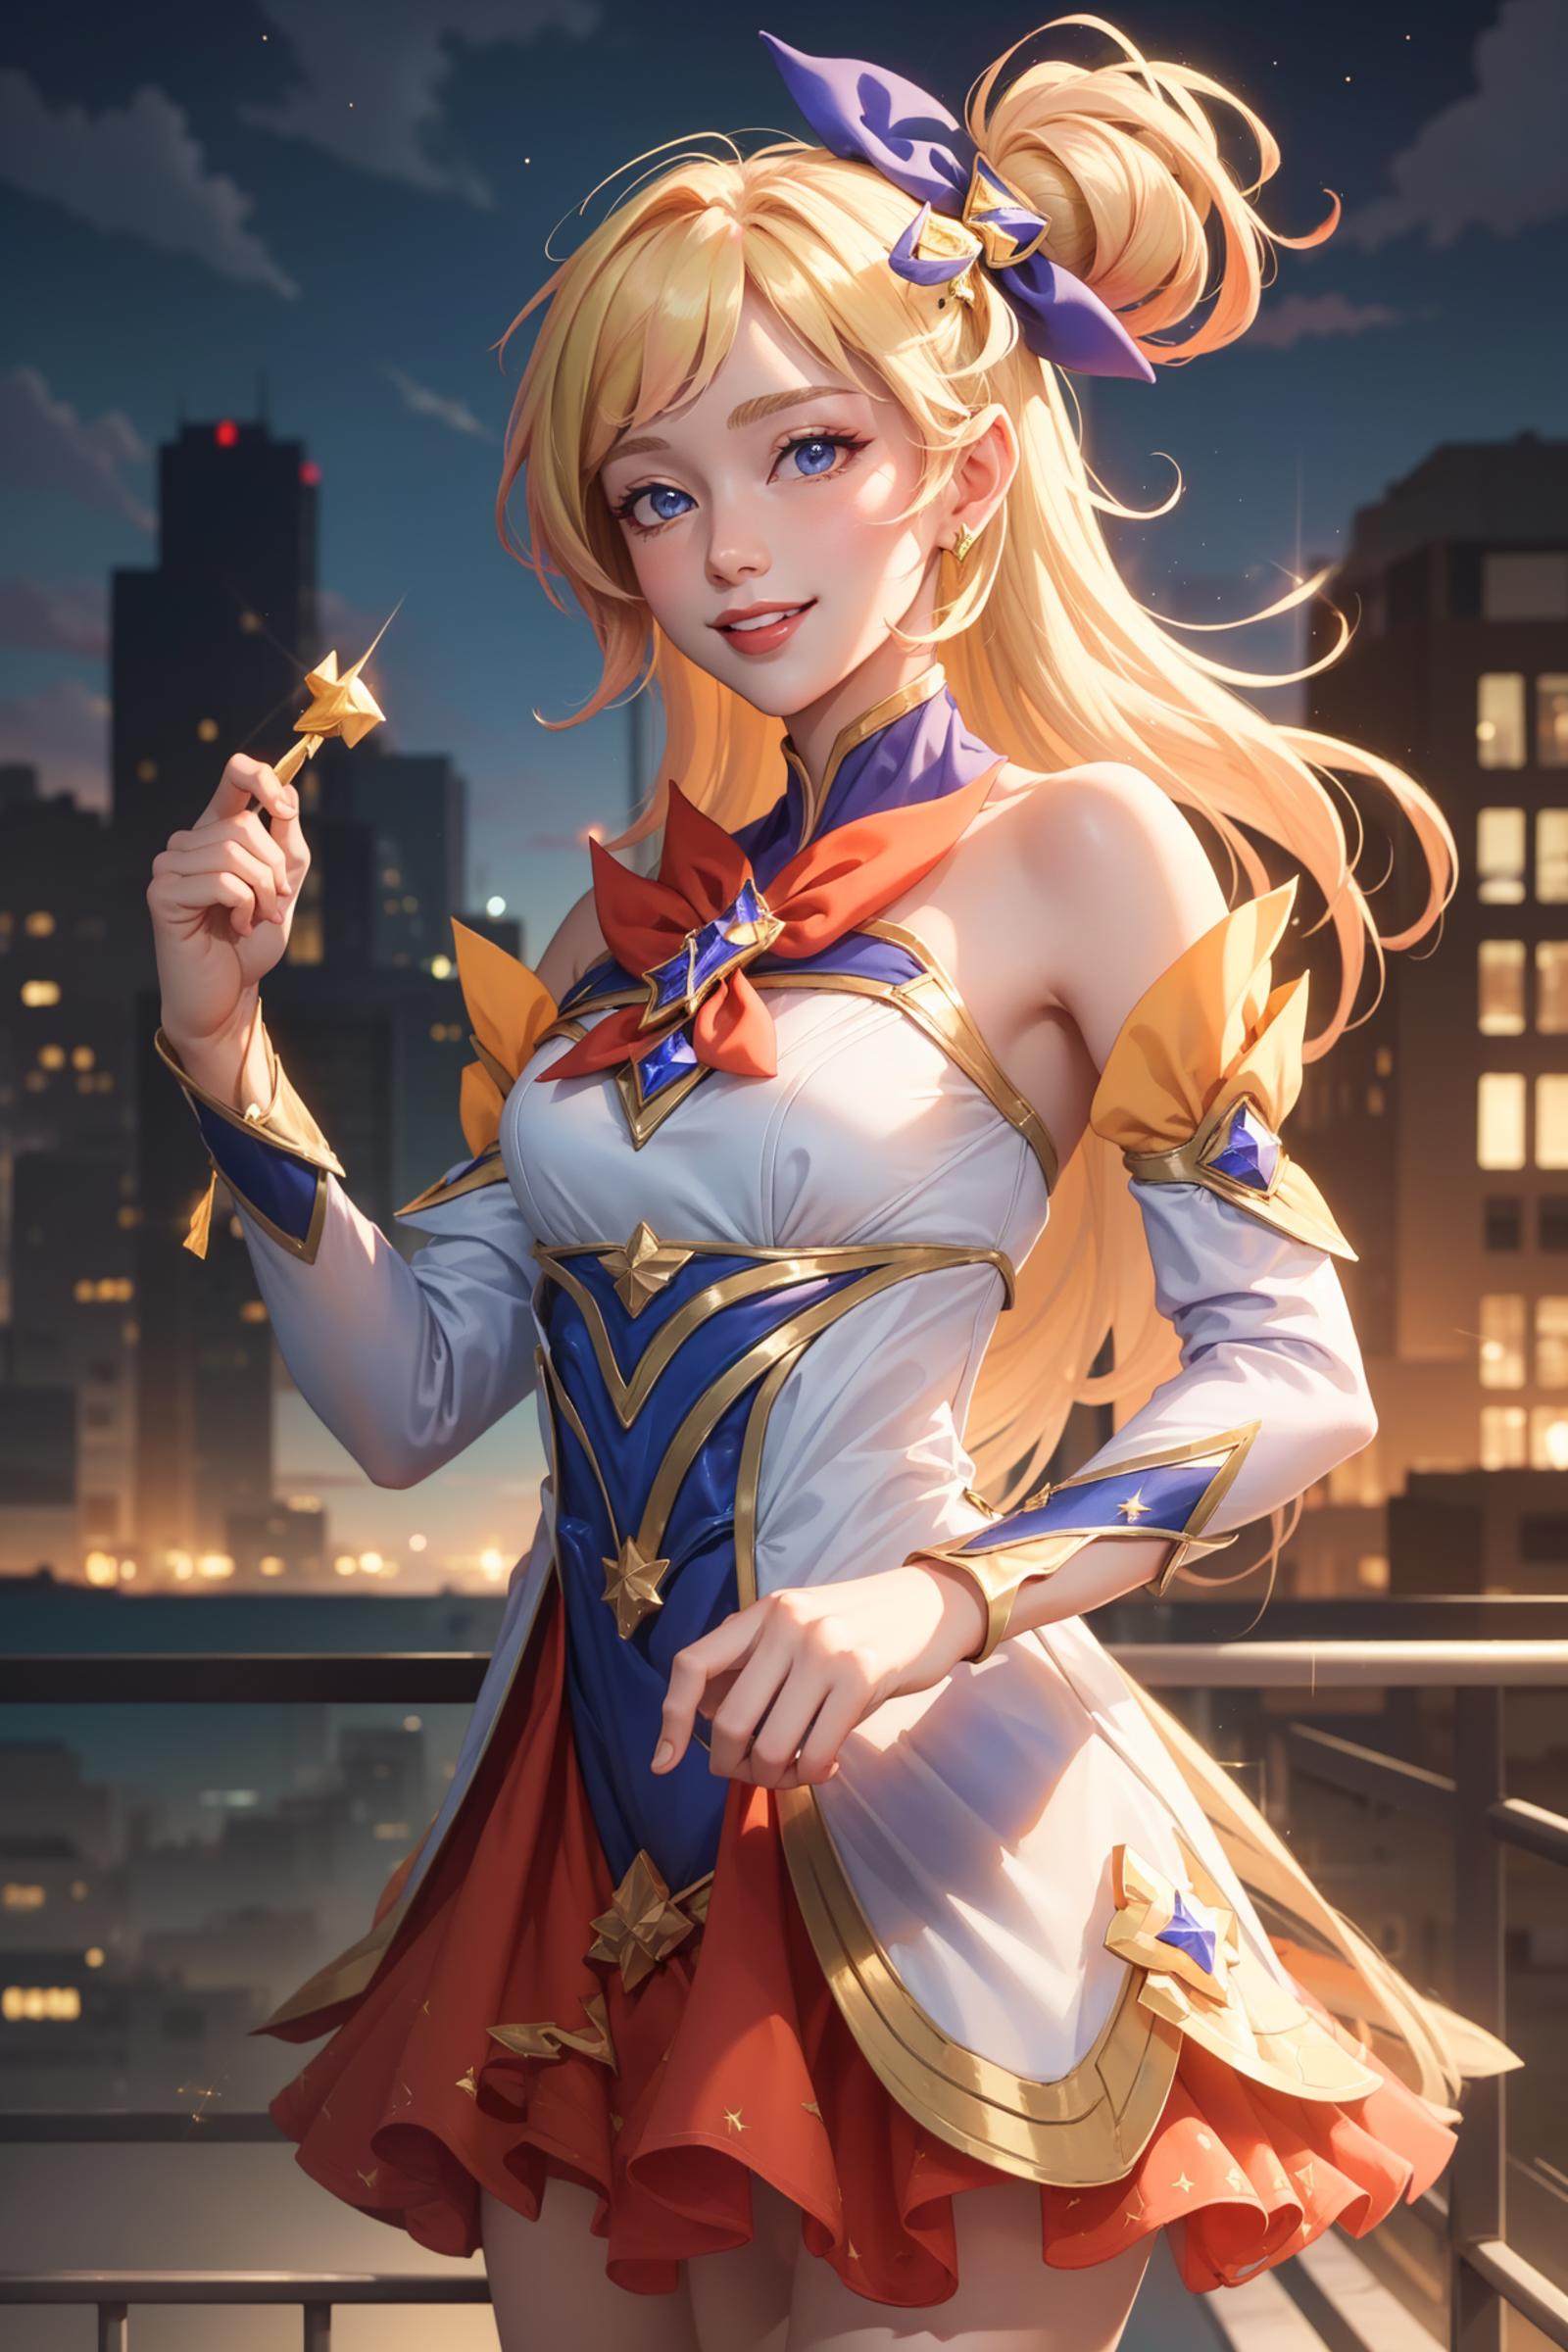 Star Guardian Seraphine and Orianna | League of Legends image by AhriMain